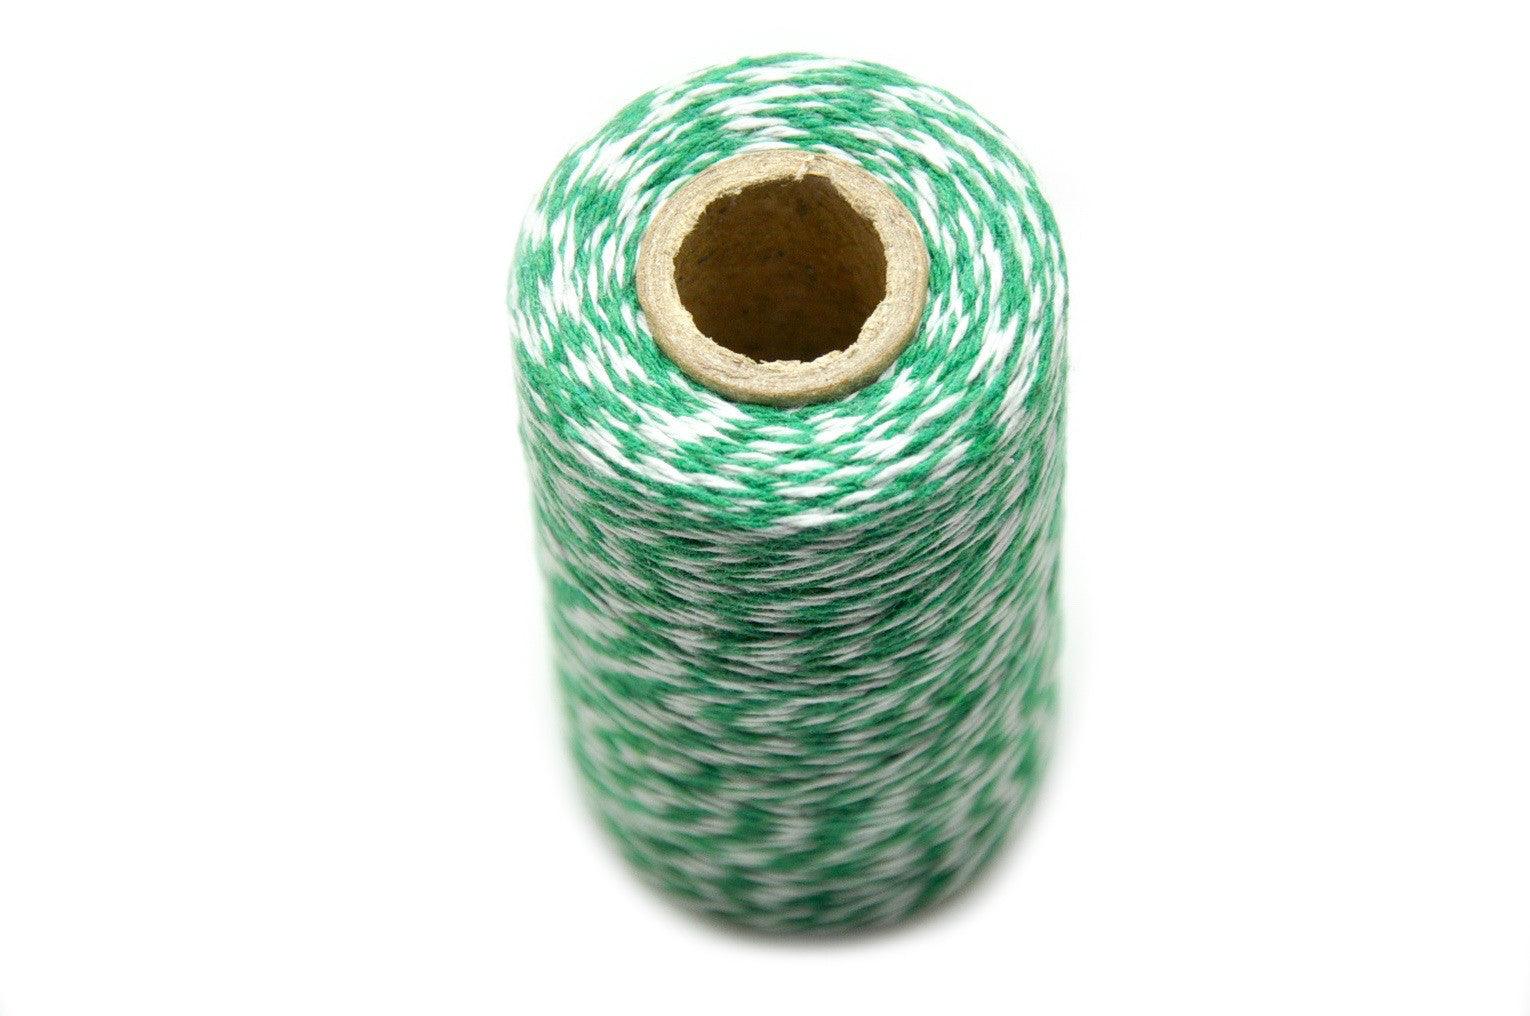 Wood Spool of String, Baker's Twine, Colored Twine, Craft Twine